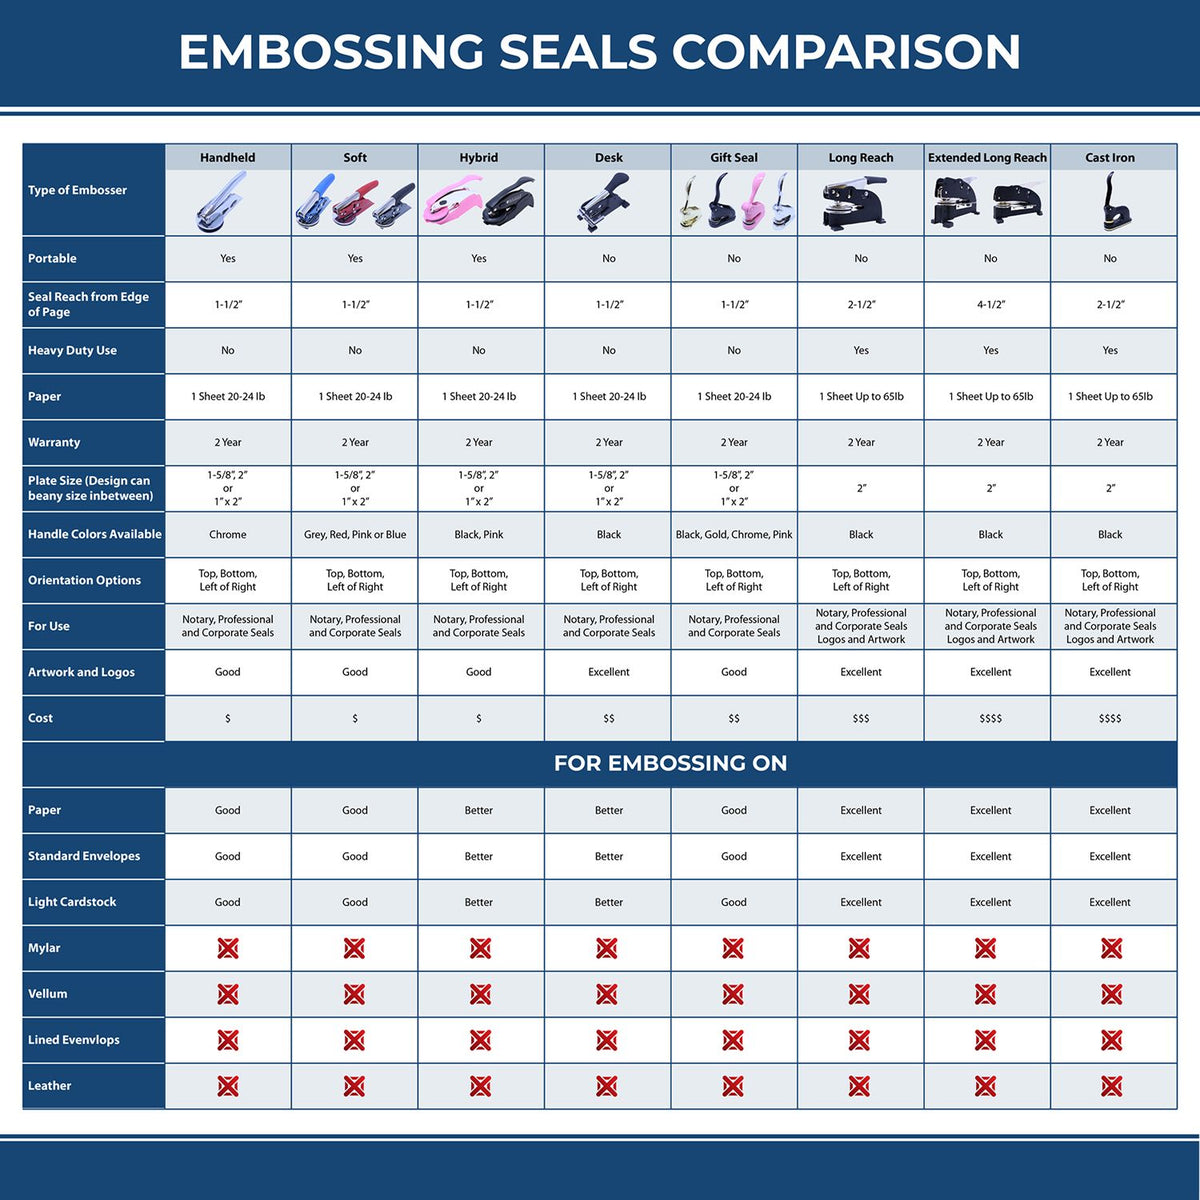 A comparison chart for the different types of mount models available for the Nevada Desk Surveyor Seal Embosser.